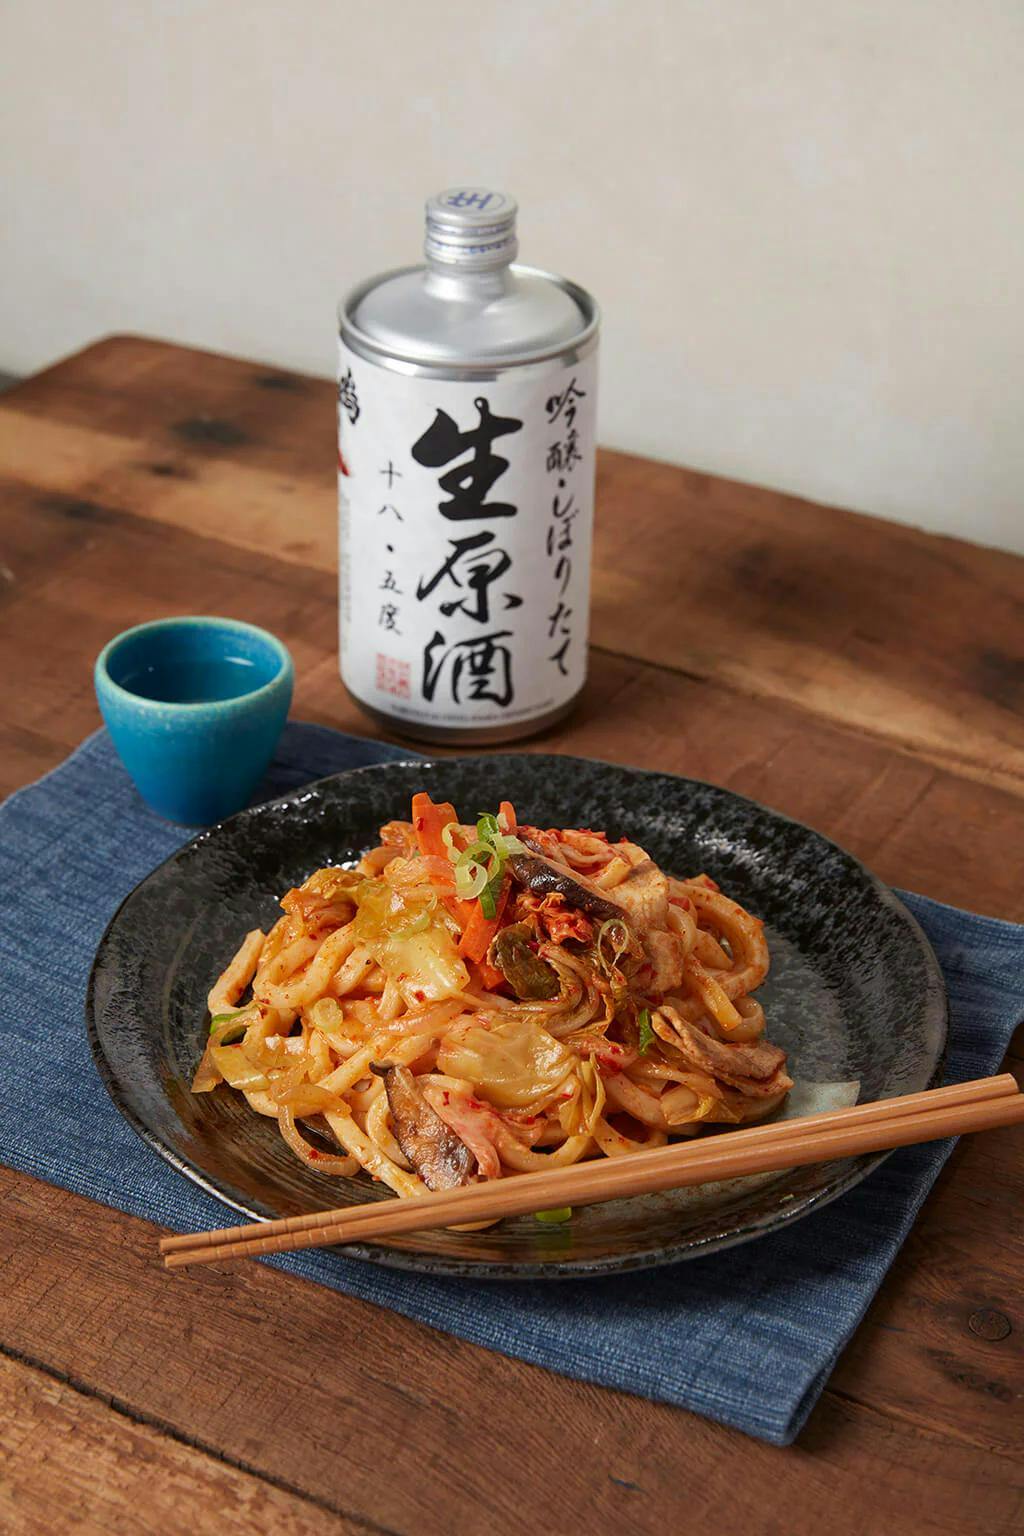 The famous Narutotai “Ginjo” Nama Genshu stands up well to heartier meals, like this spicy noodle dish.